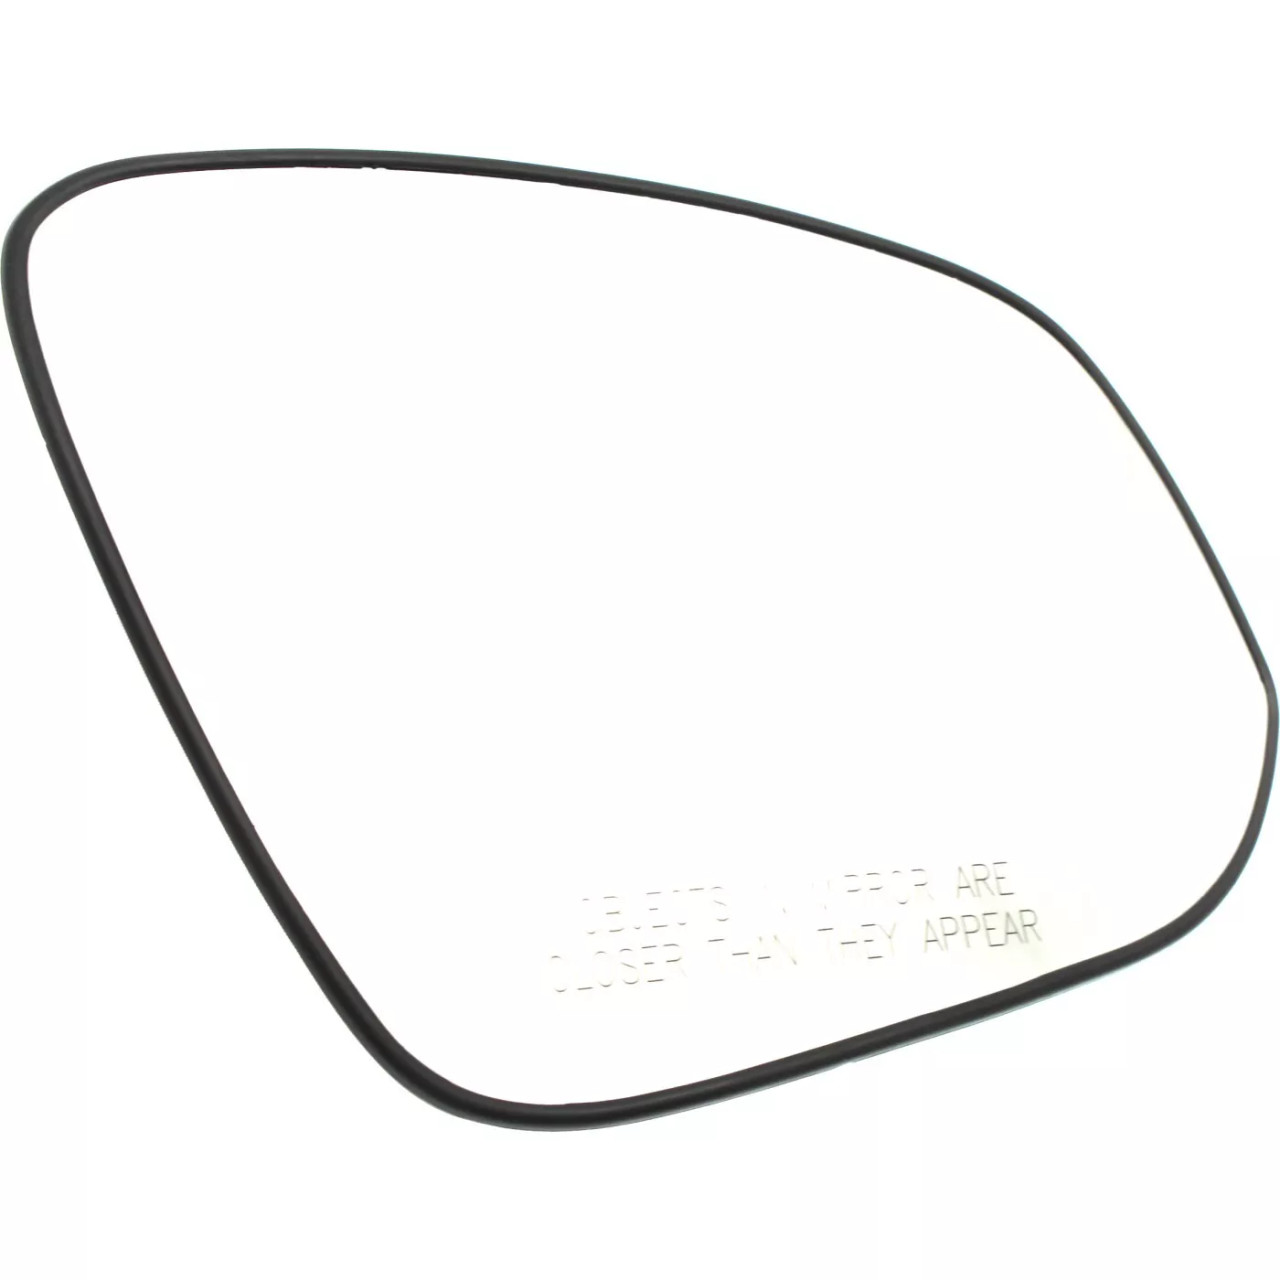 Passenger Mirror Glass For 2013-18 Toyota RAV4 Heated Convex with Backing Plate